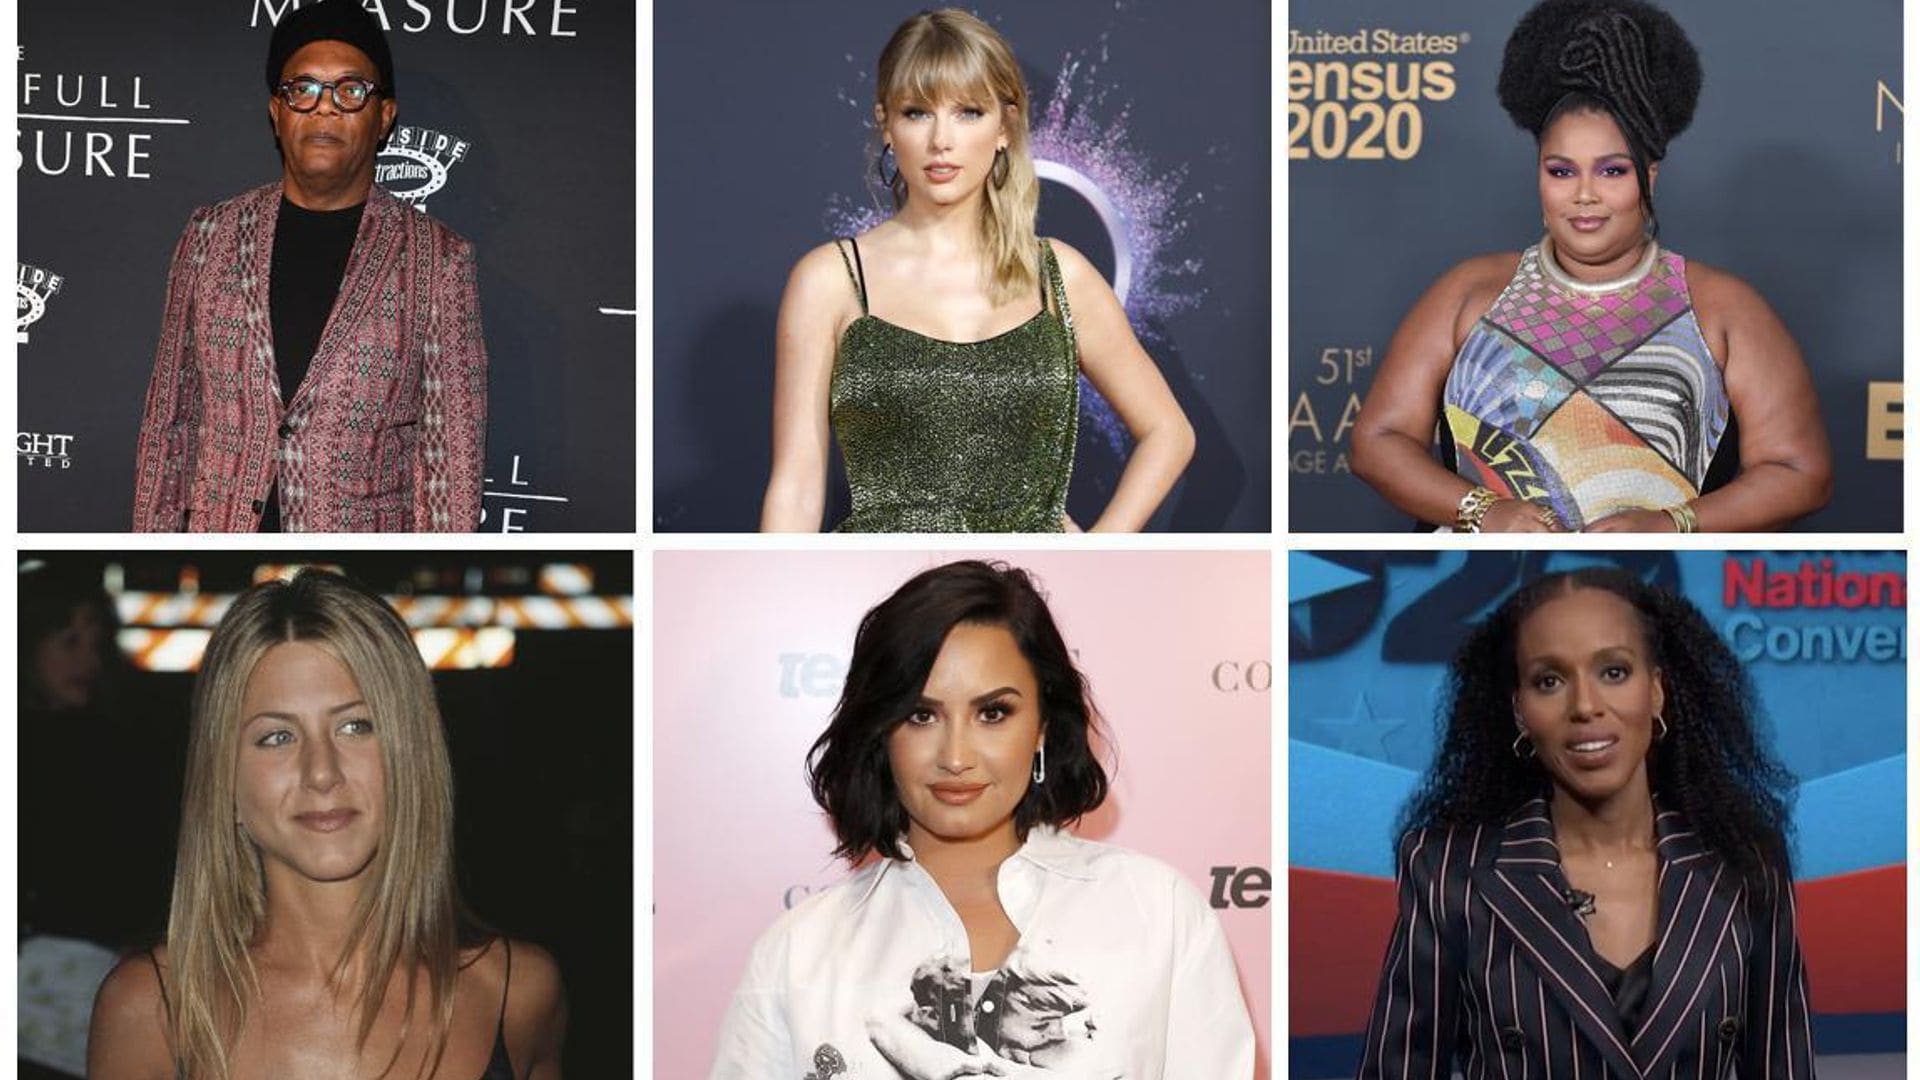 From Taylor Swift to Jennifer Aniston: 8 Celebrities inspiring fans to vote in the 2020 presidential election